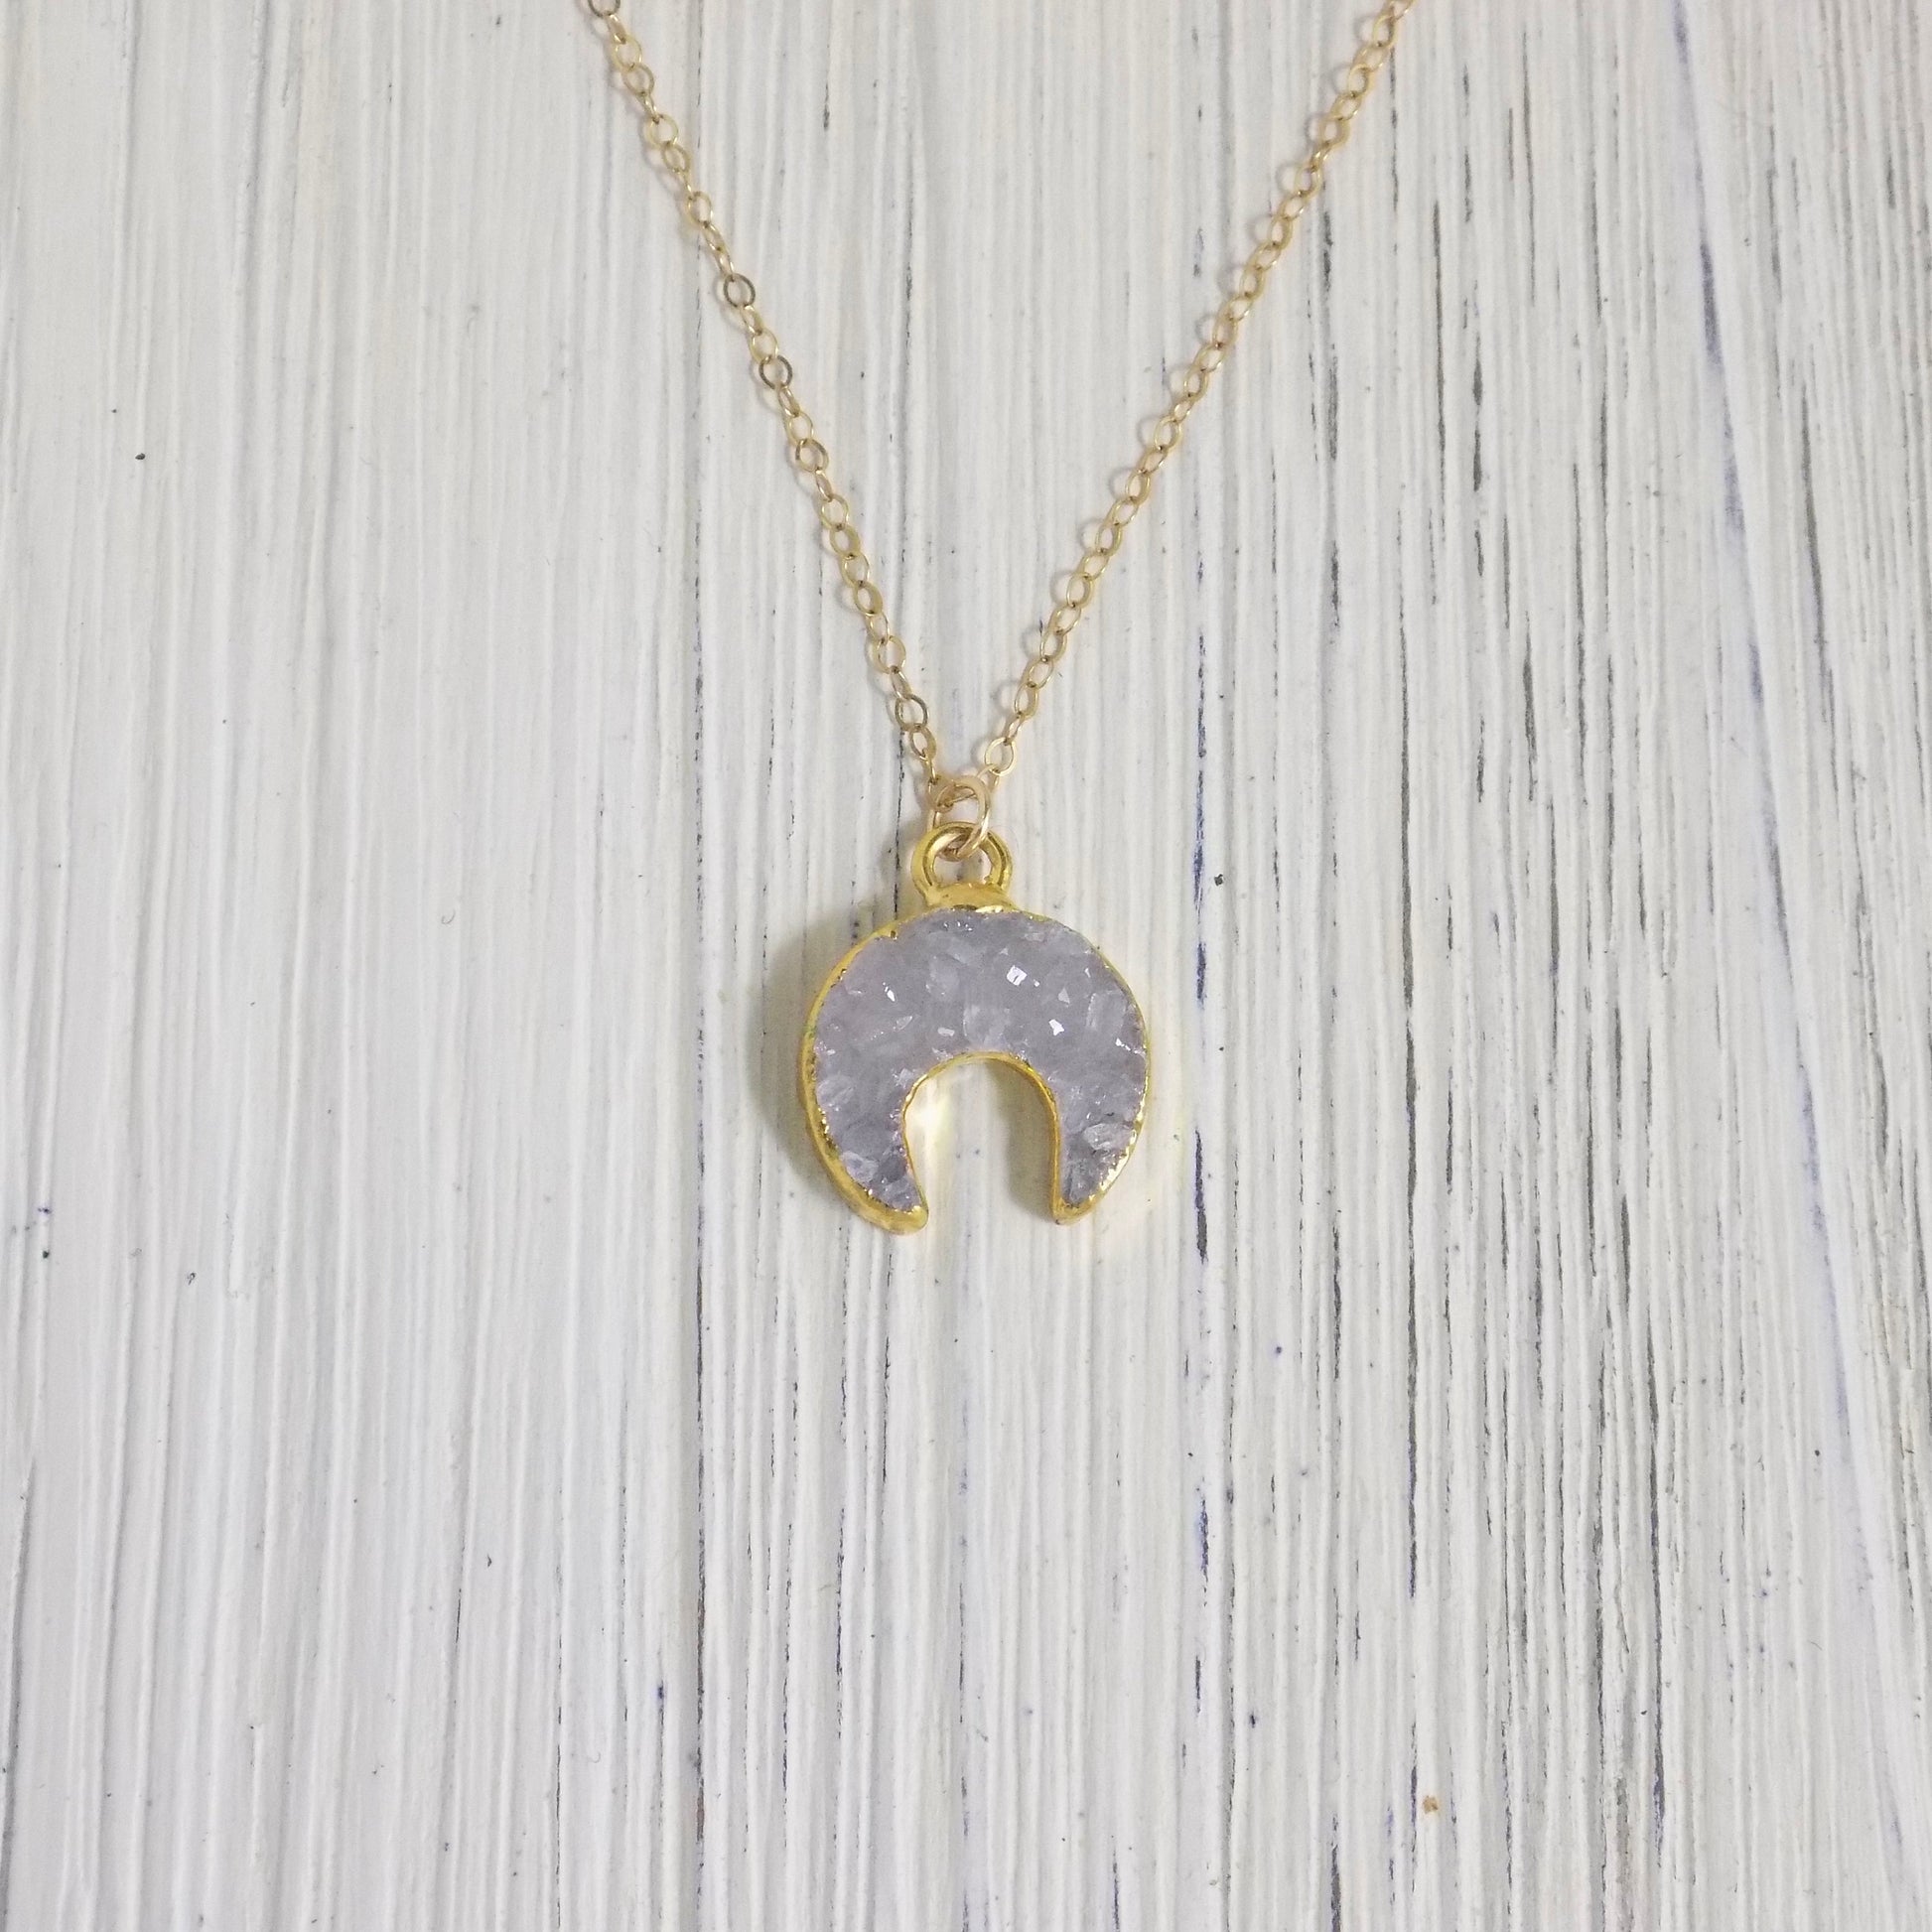 Minimalist Double Horn Druzy Necklace, Crescent Moon Pendant Gold For Layering, R5-13